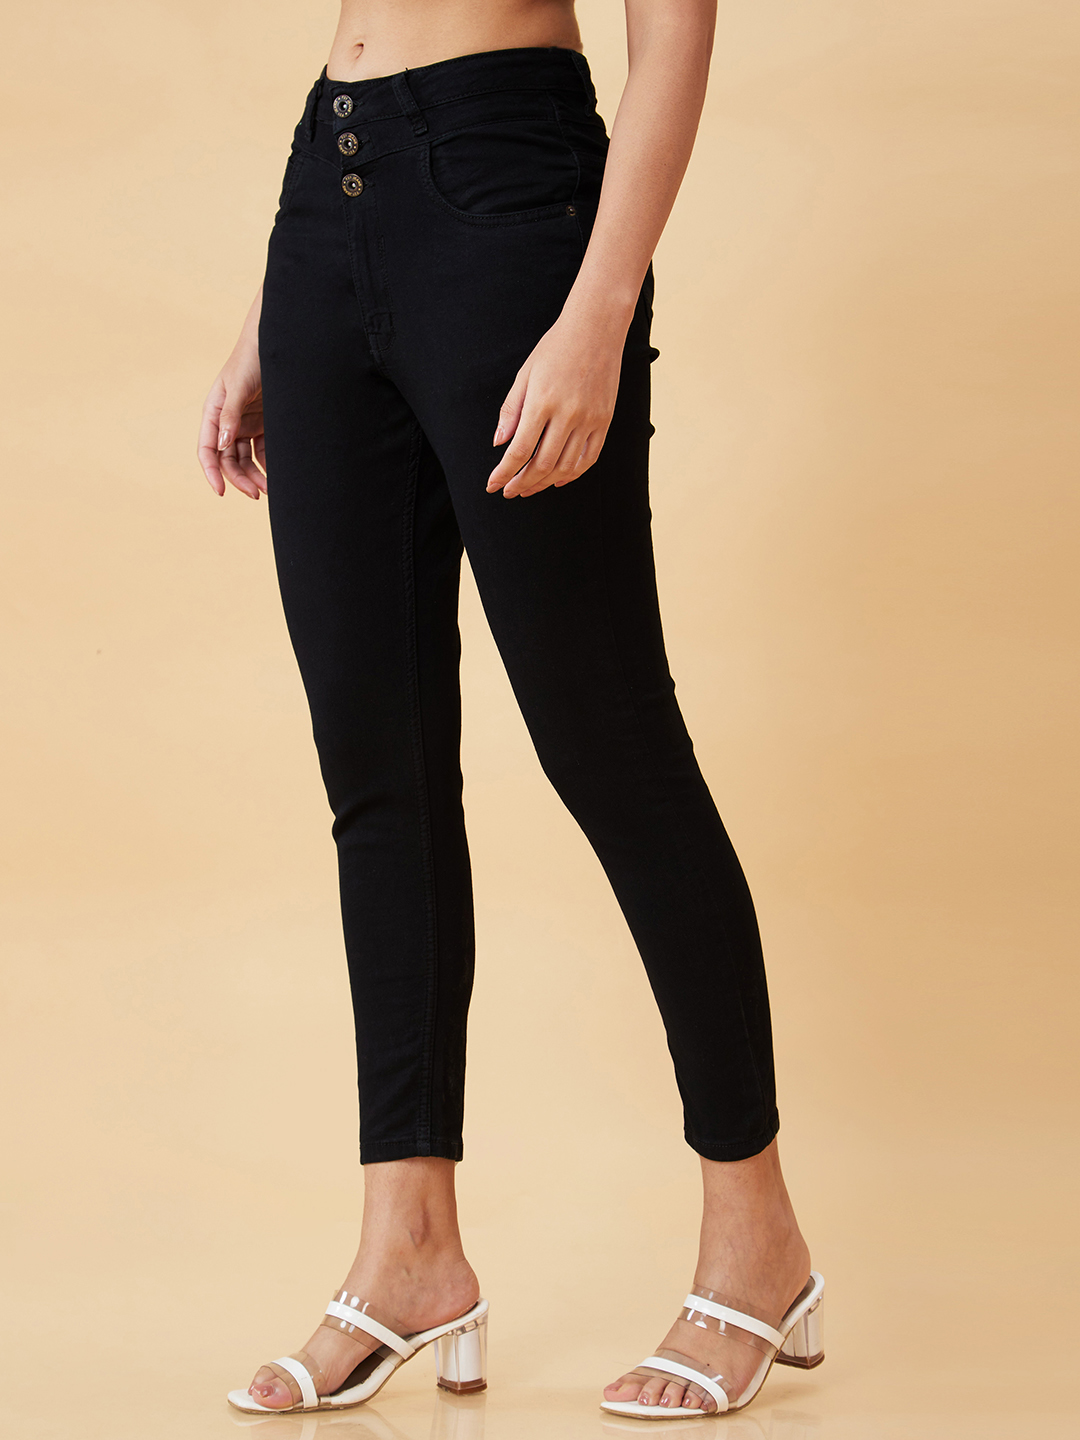 Globus Women Black High-Rise Skinny Fit Stretchable Jeans